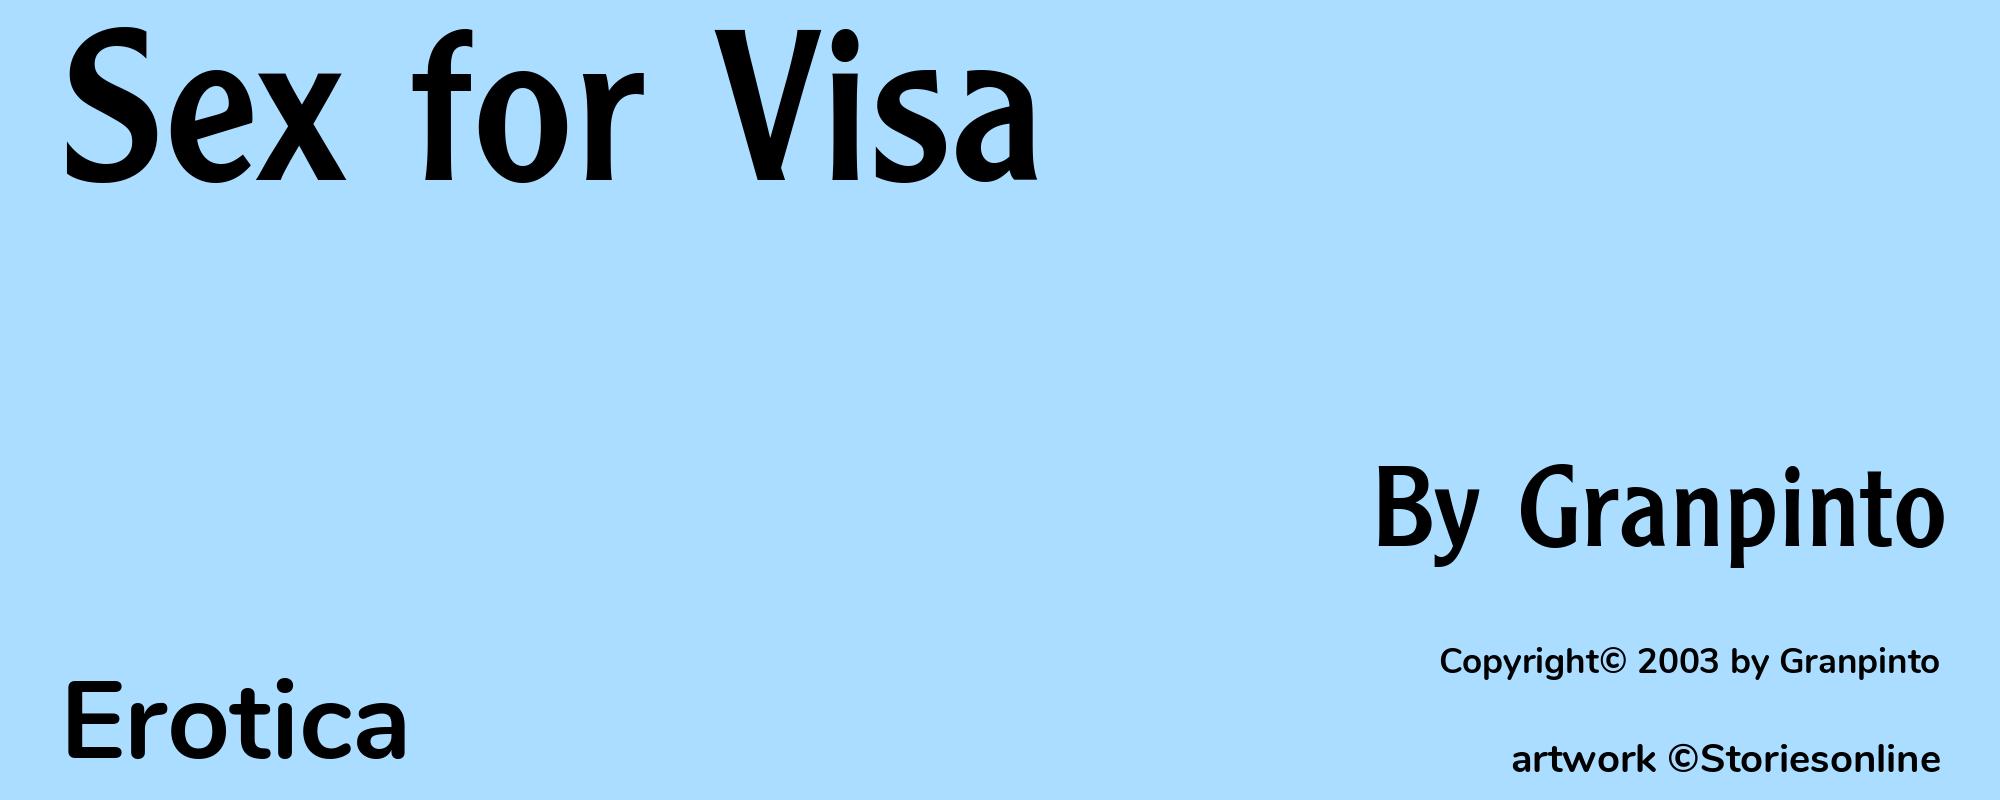 Sex for Visa - Cover